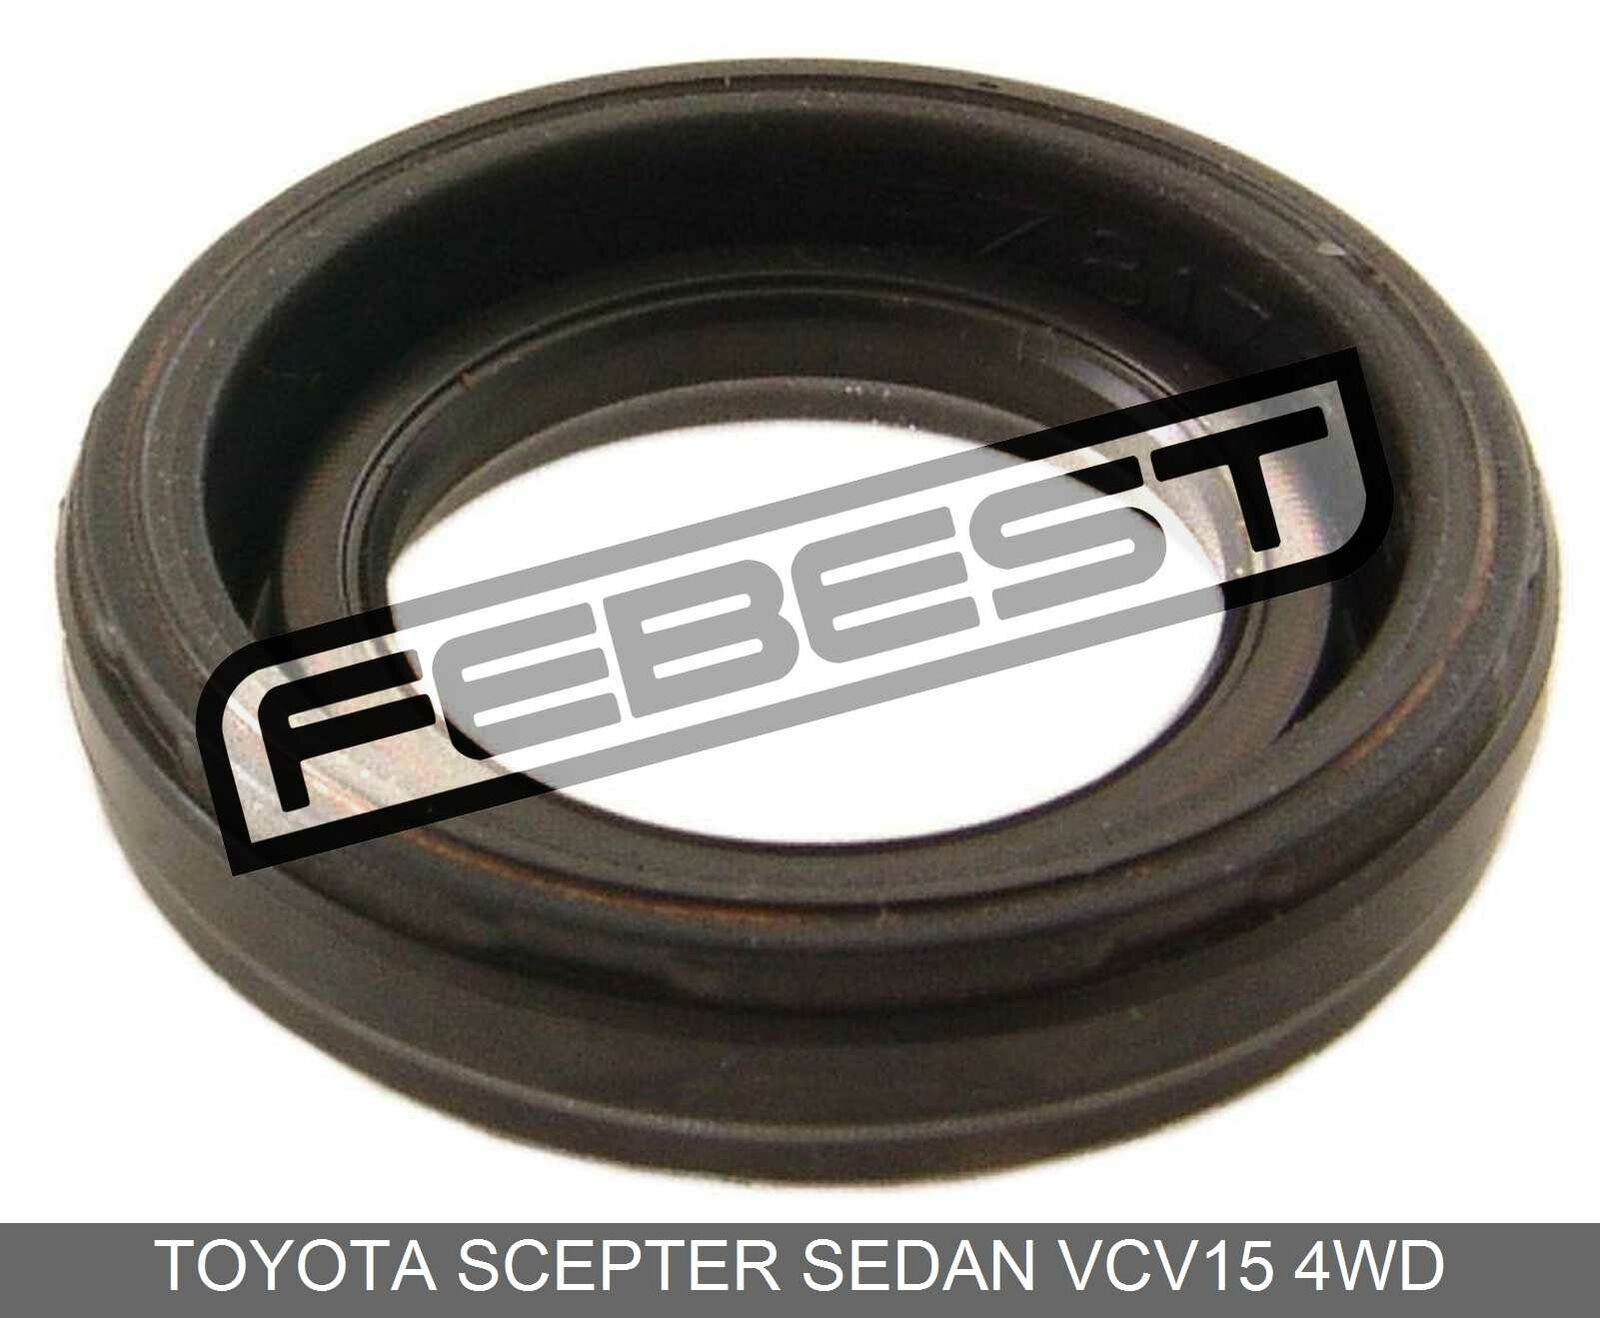 Seal Ring Spark Plug Tube For Scepter Toyota Sedan 4Wd Limited 2021 new time for free shipping Vcv15 1